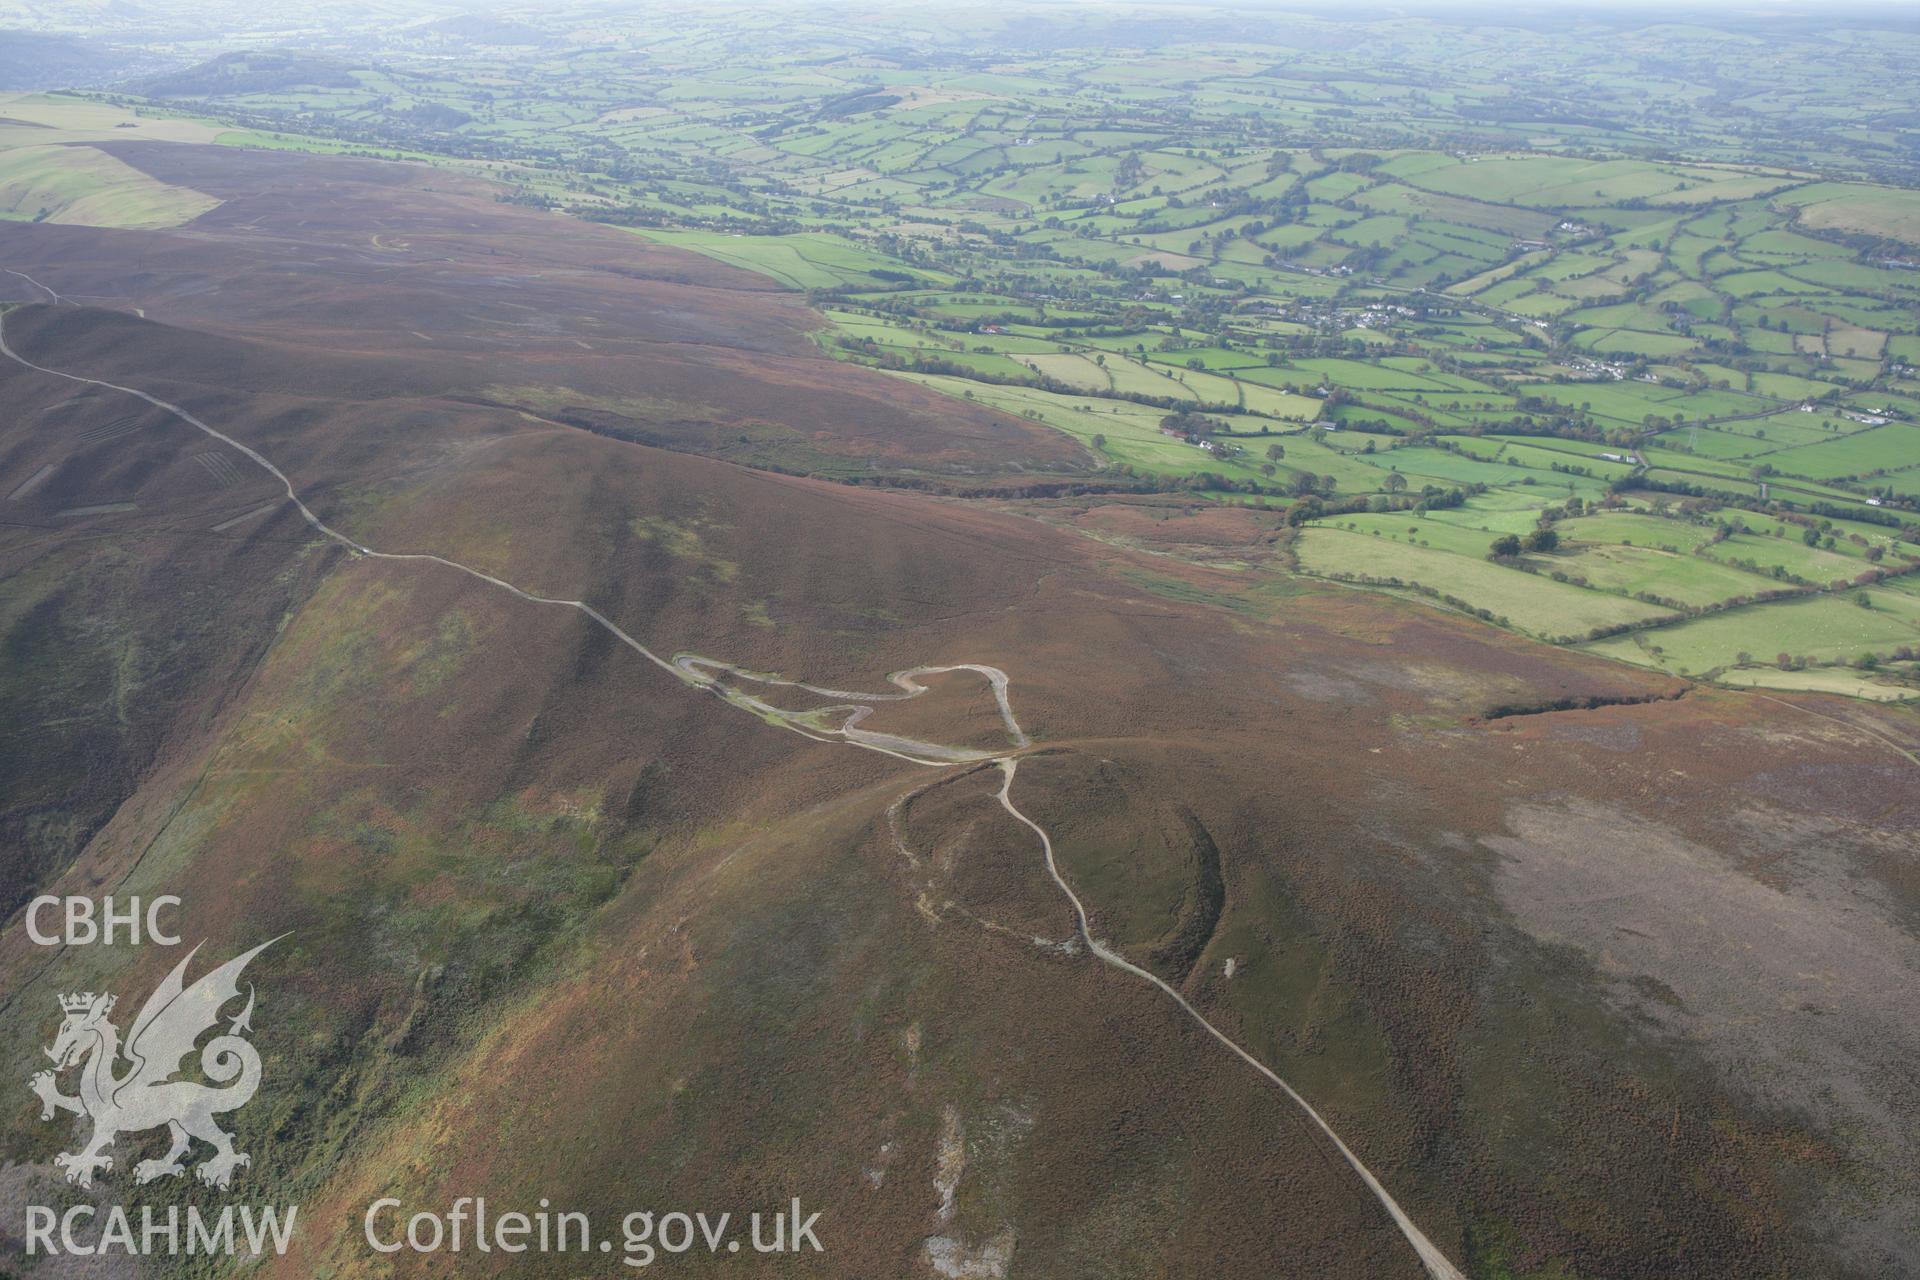 RCAHMW colour oblique aerial photograph of Moel-y-Gaer Hillfort, Llantysilio. Taken on 13 October 2009 by Toby Driver